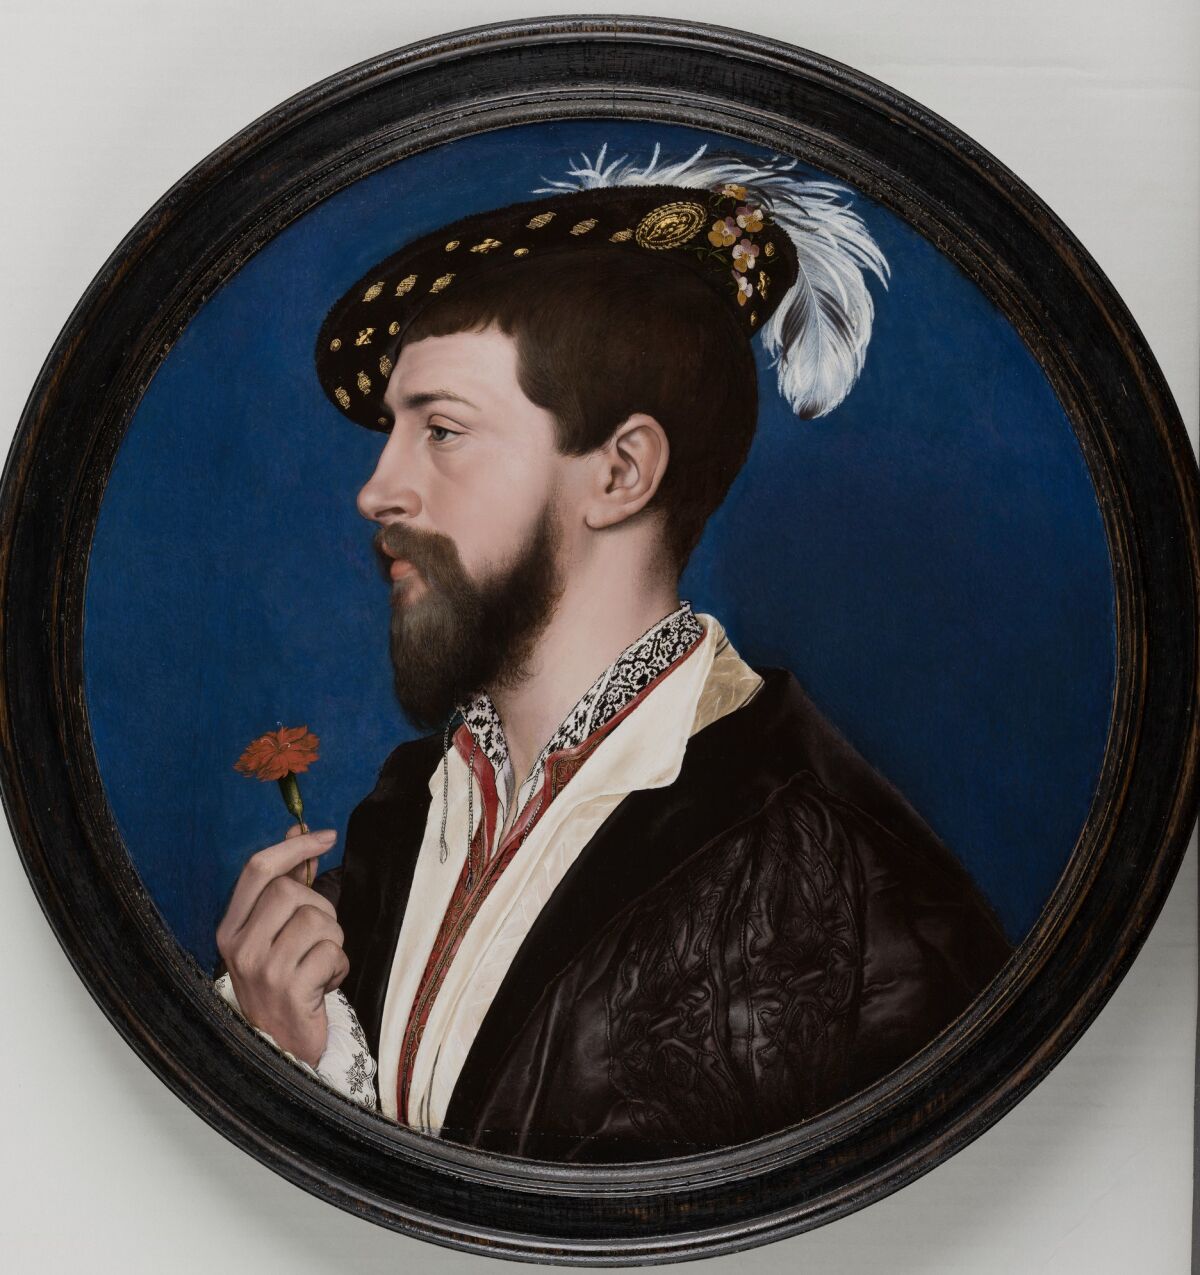 A portrait on a circular canvas shows a man in 16th century dress and a plumed hat holding a red flower.